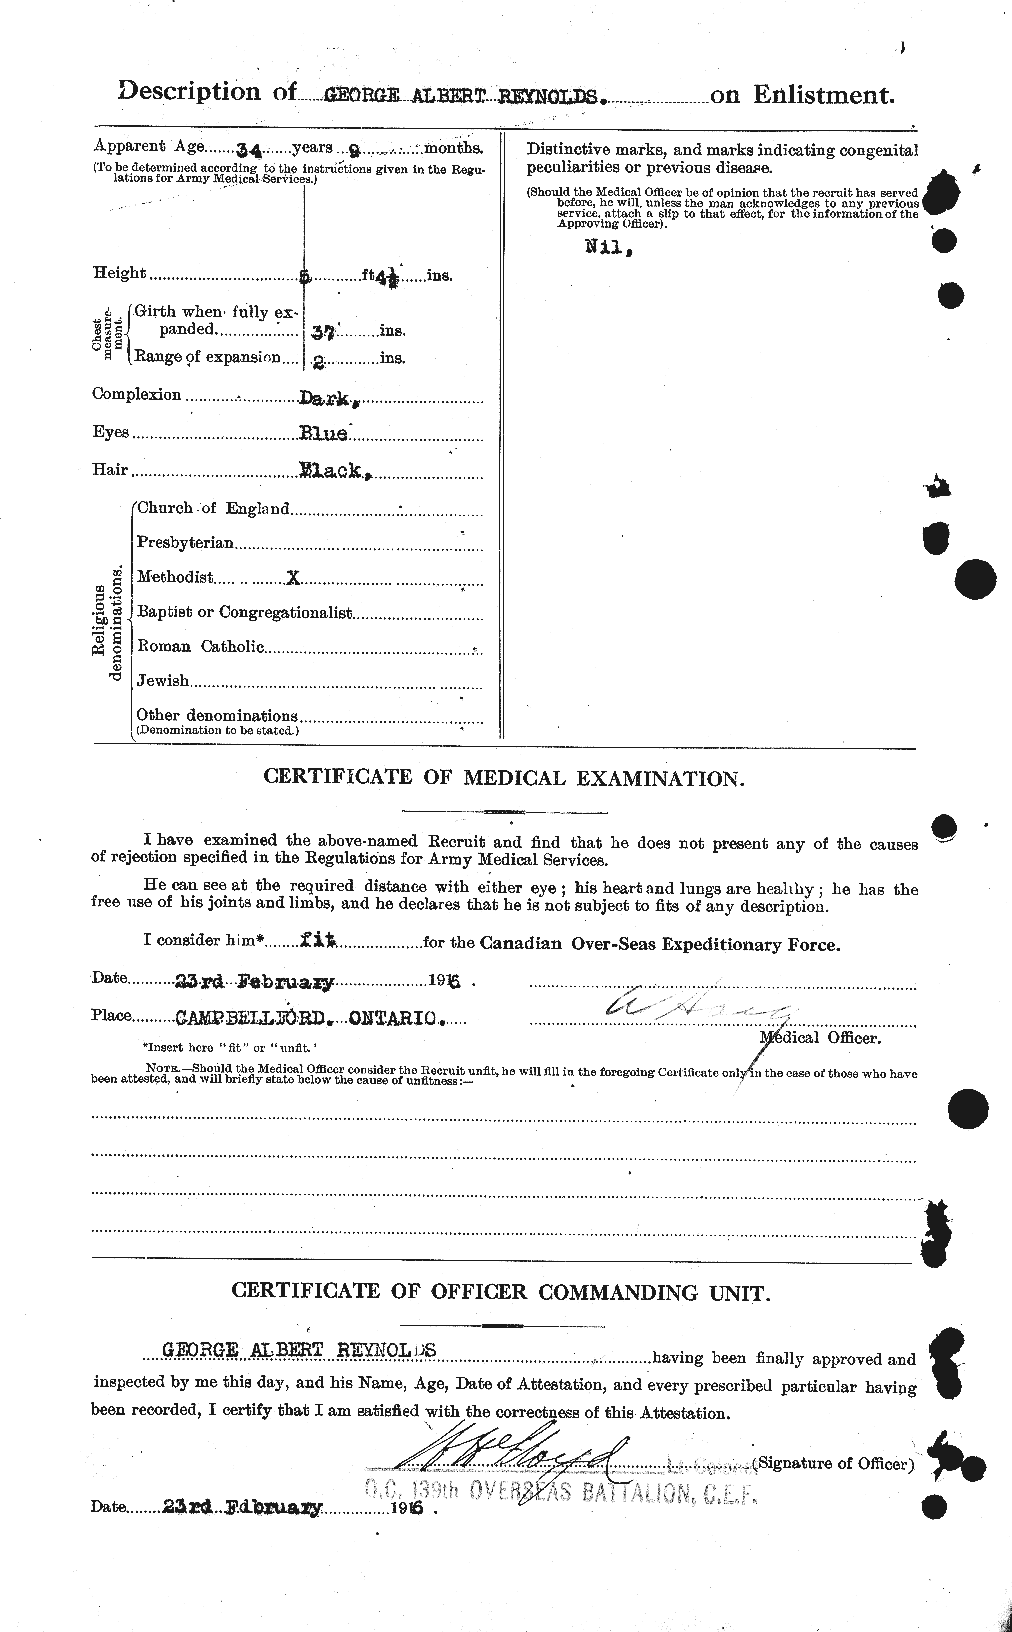 Personnel Records of the First World War - CEF 599210b